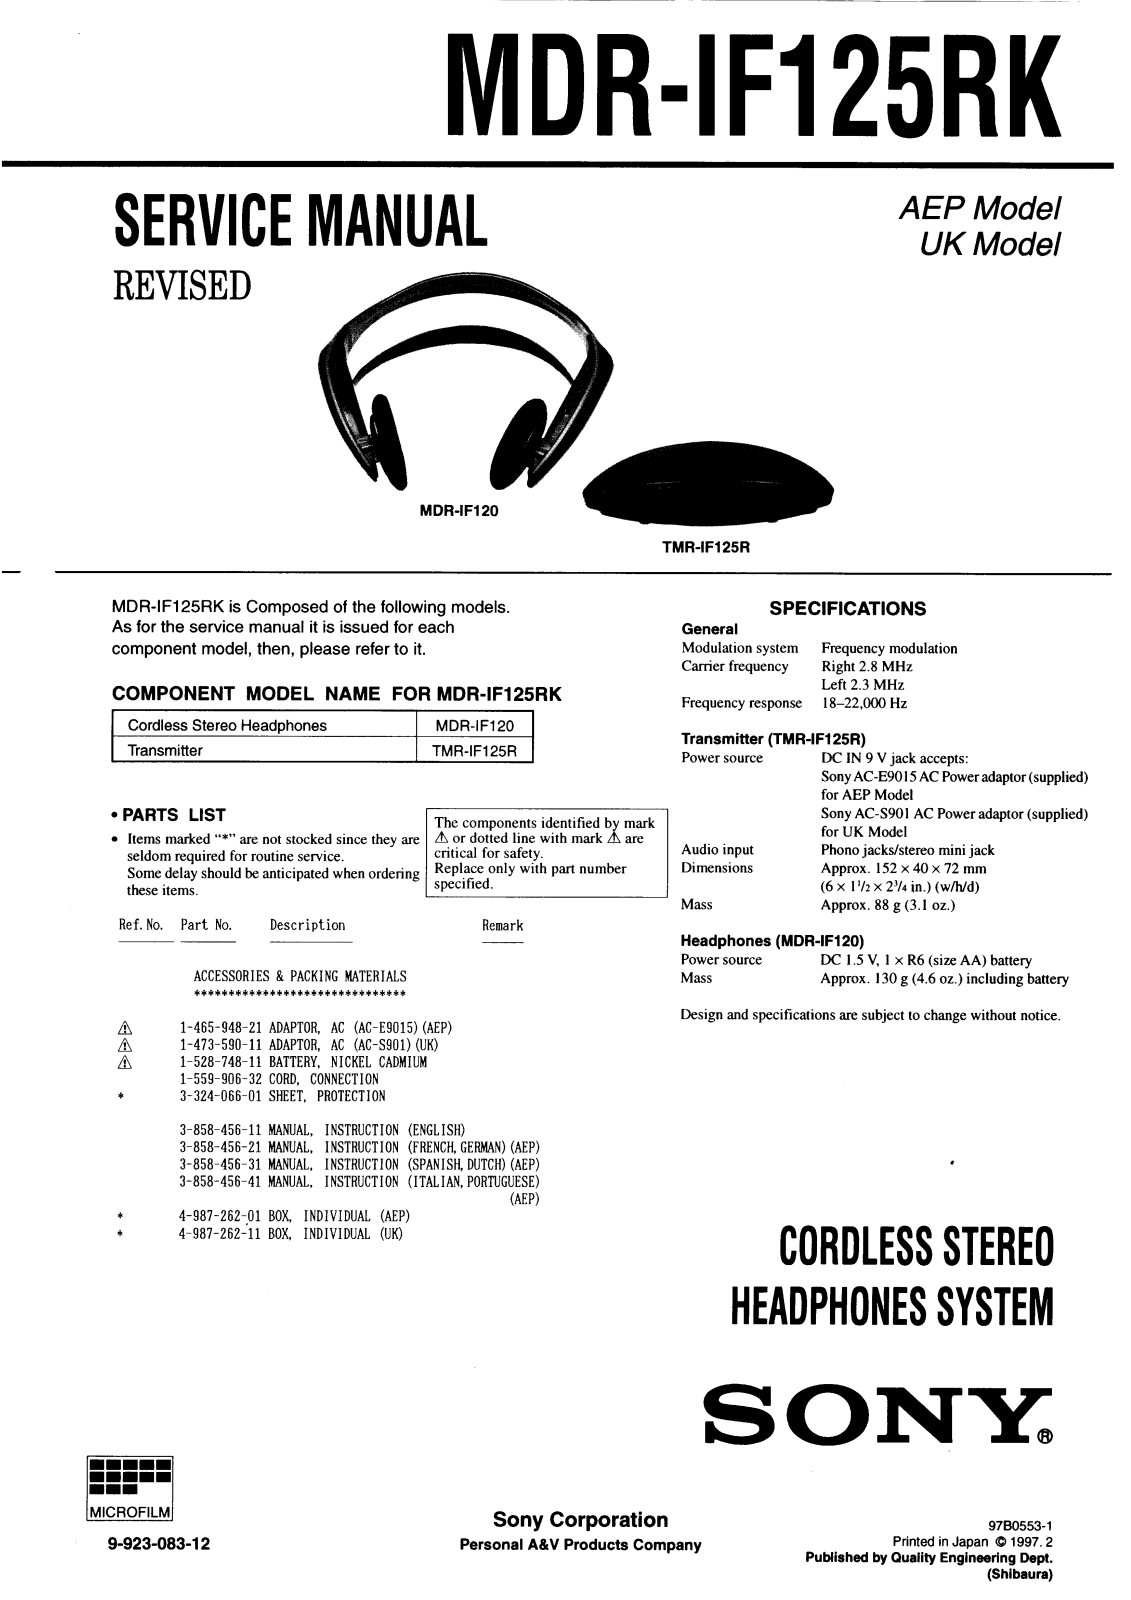 Sony MDR-IF125RK Service Manual